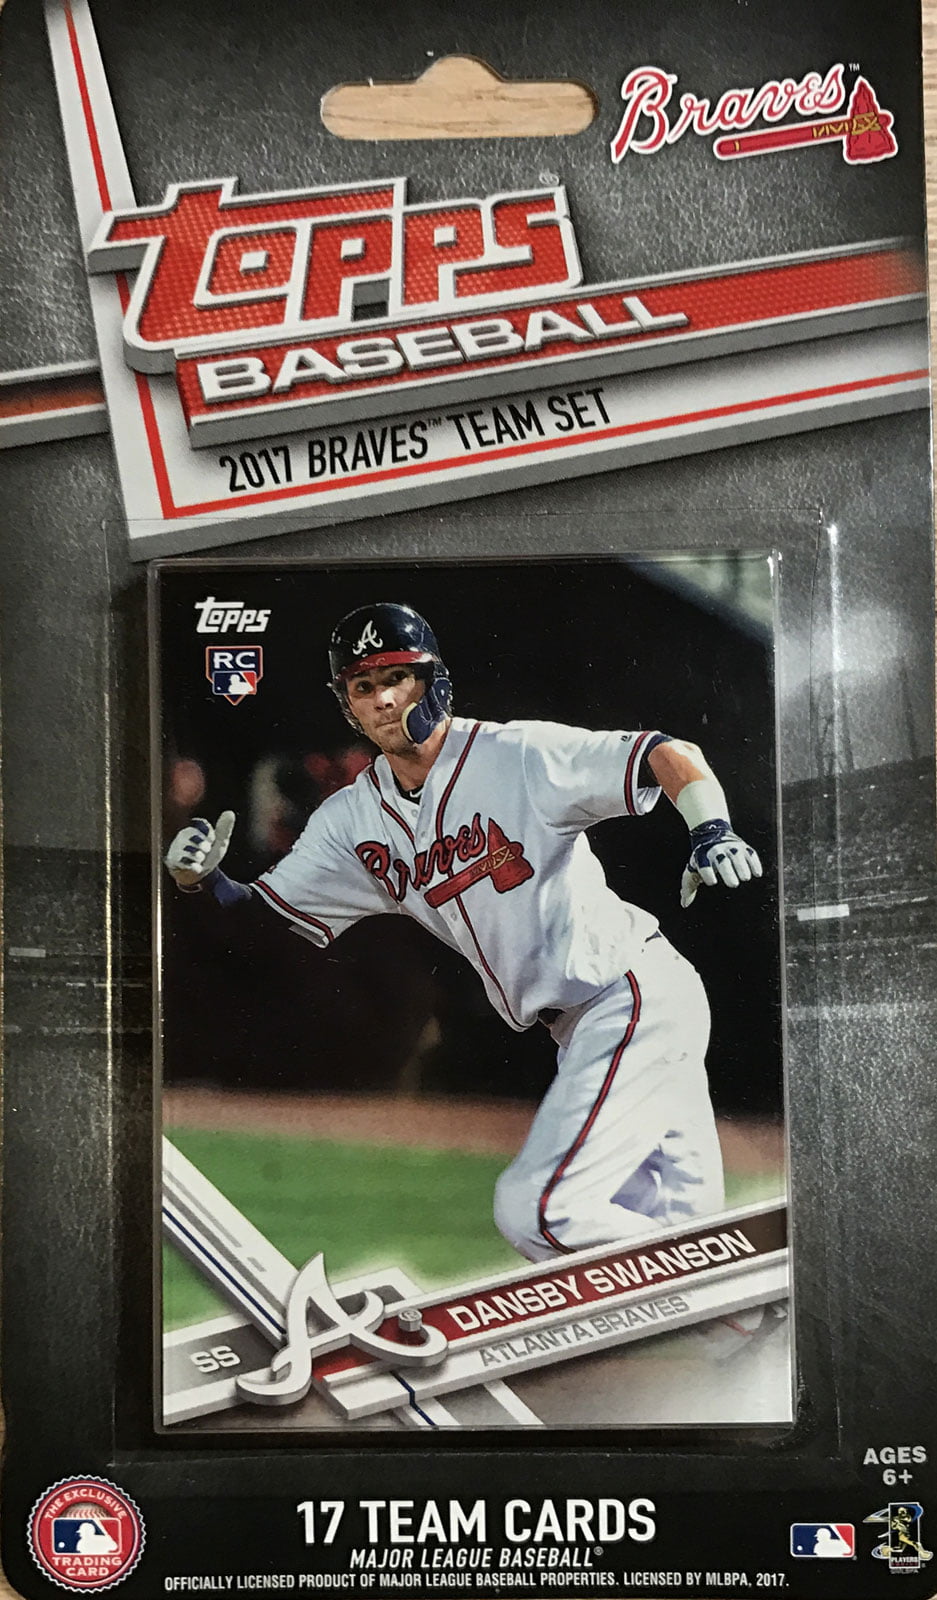 Atlanta Braves 2019 Topps Baseball Factory Sealed Special Edition 17 Card Team Set with Ronald Acuna Jr and Ozzie Albies Plus